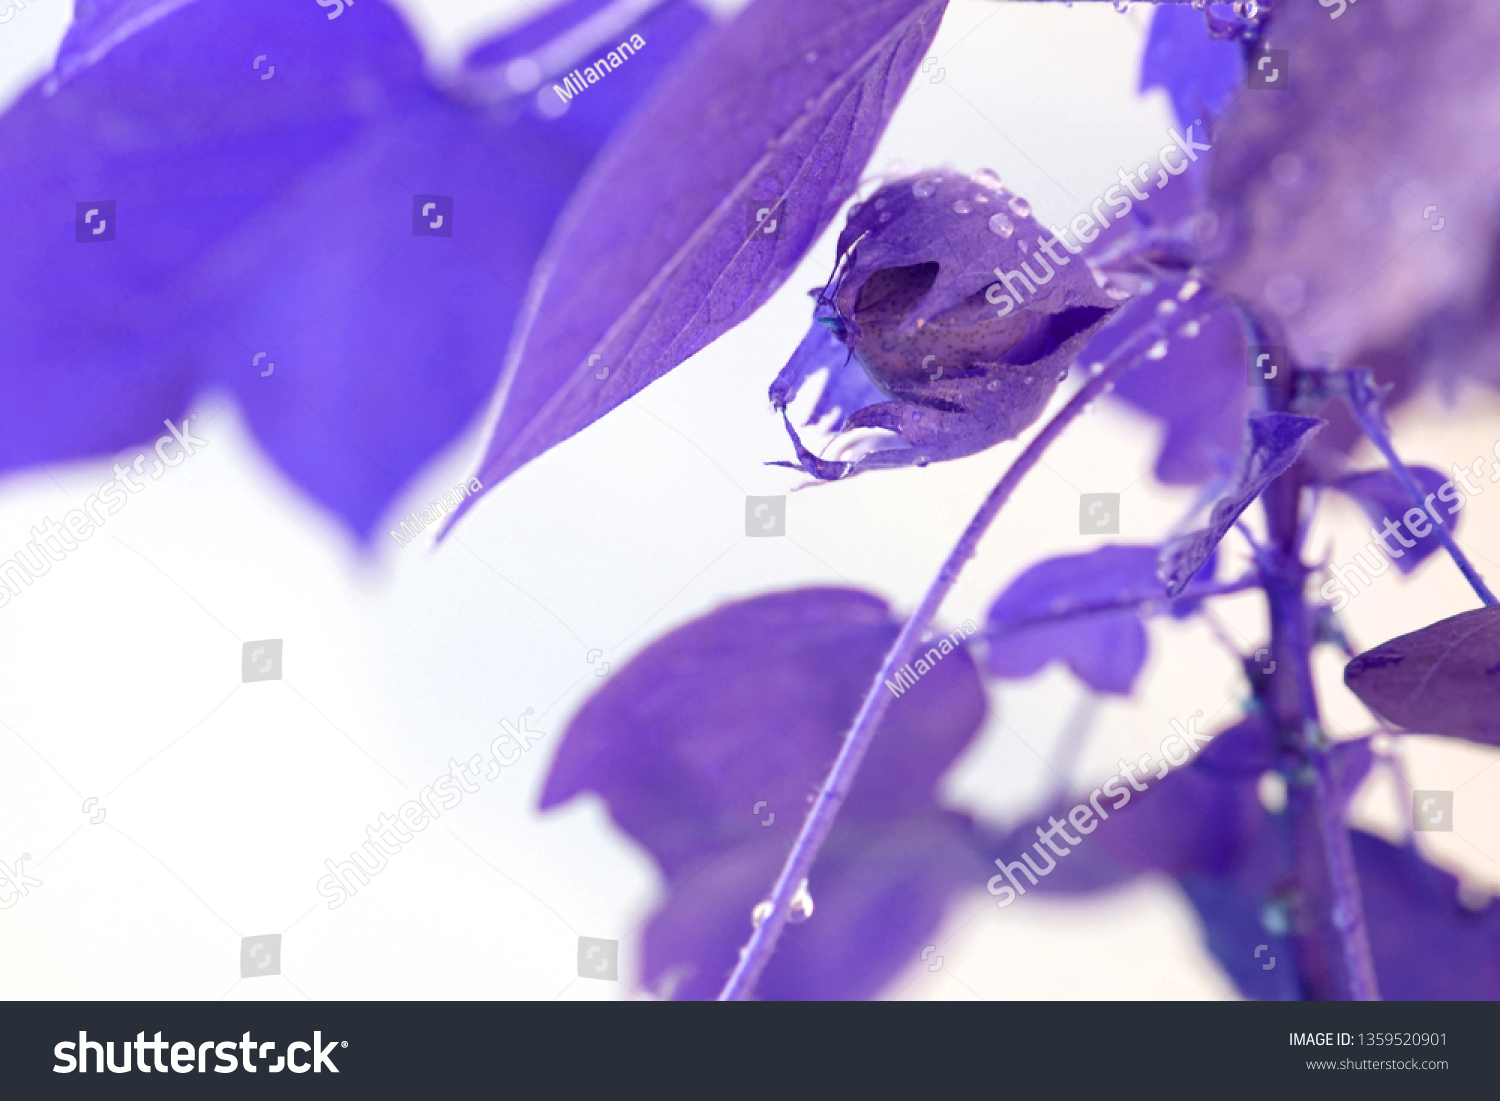 Violet effect. Cotton plant leaves background. Leaves with drops of water.                 #1359520901